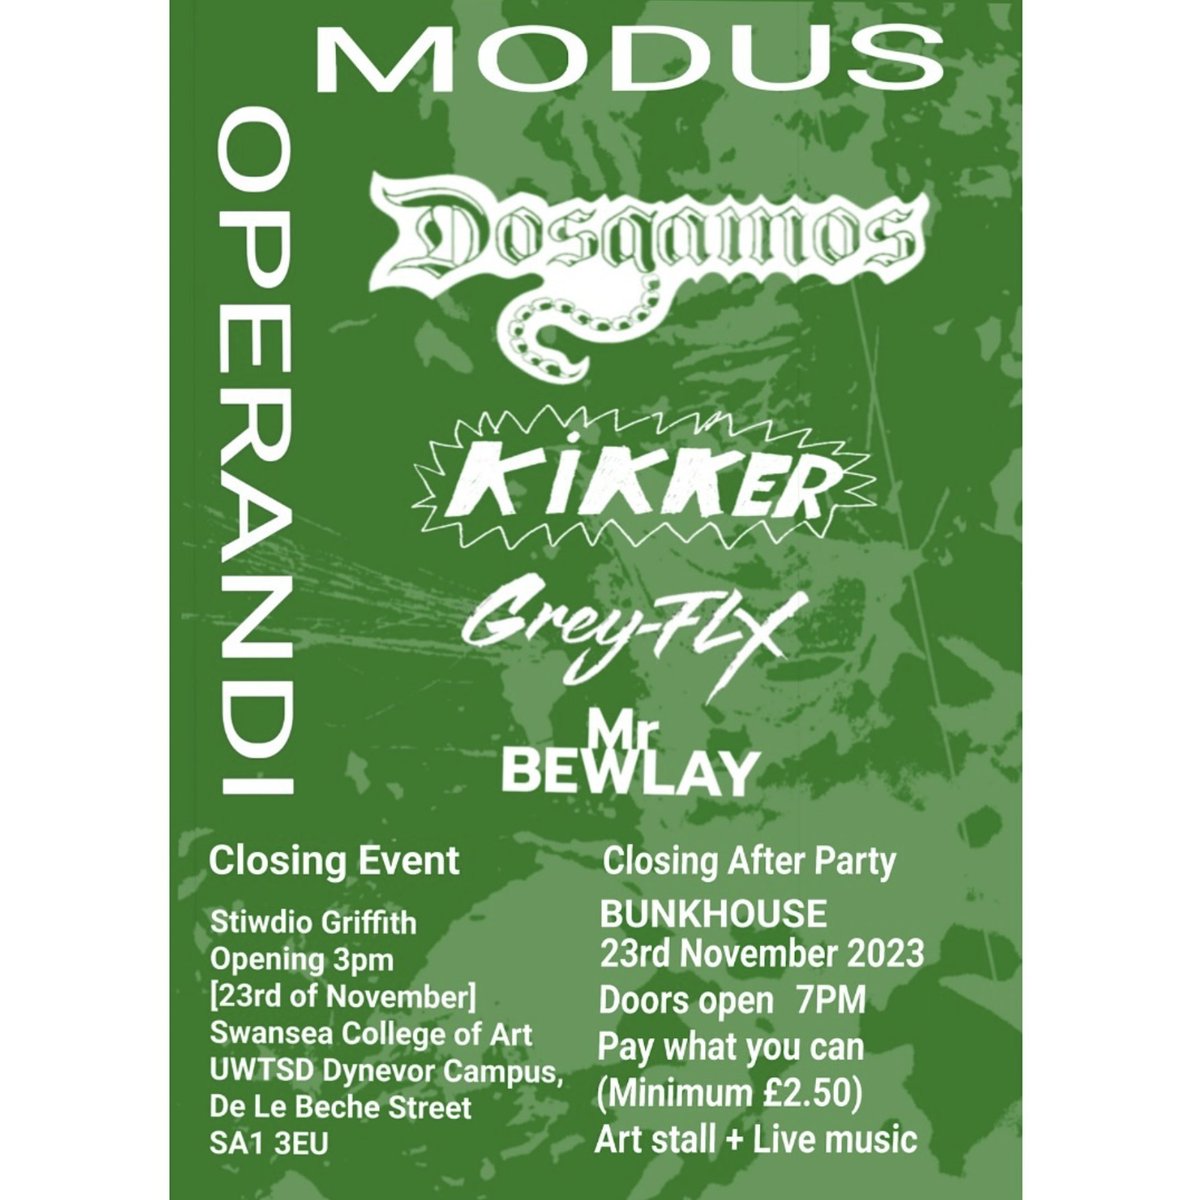 𝙏𝙊𝙉𝙄𝙂𝙃𝙏‼️
The #UWTSD Class of 2024 celebrate their exhibition MODUS OPERANDI after-party!🦖

Feat. art stalls & live music from:
Dosgamos
@kikkersuck
@FlxGrey
@BewlayMr

Students get 10% off drinks with IDs 😎

Come down & support local artists 💚

🕕Doors 18.00
🎟️DONATION